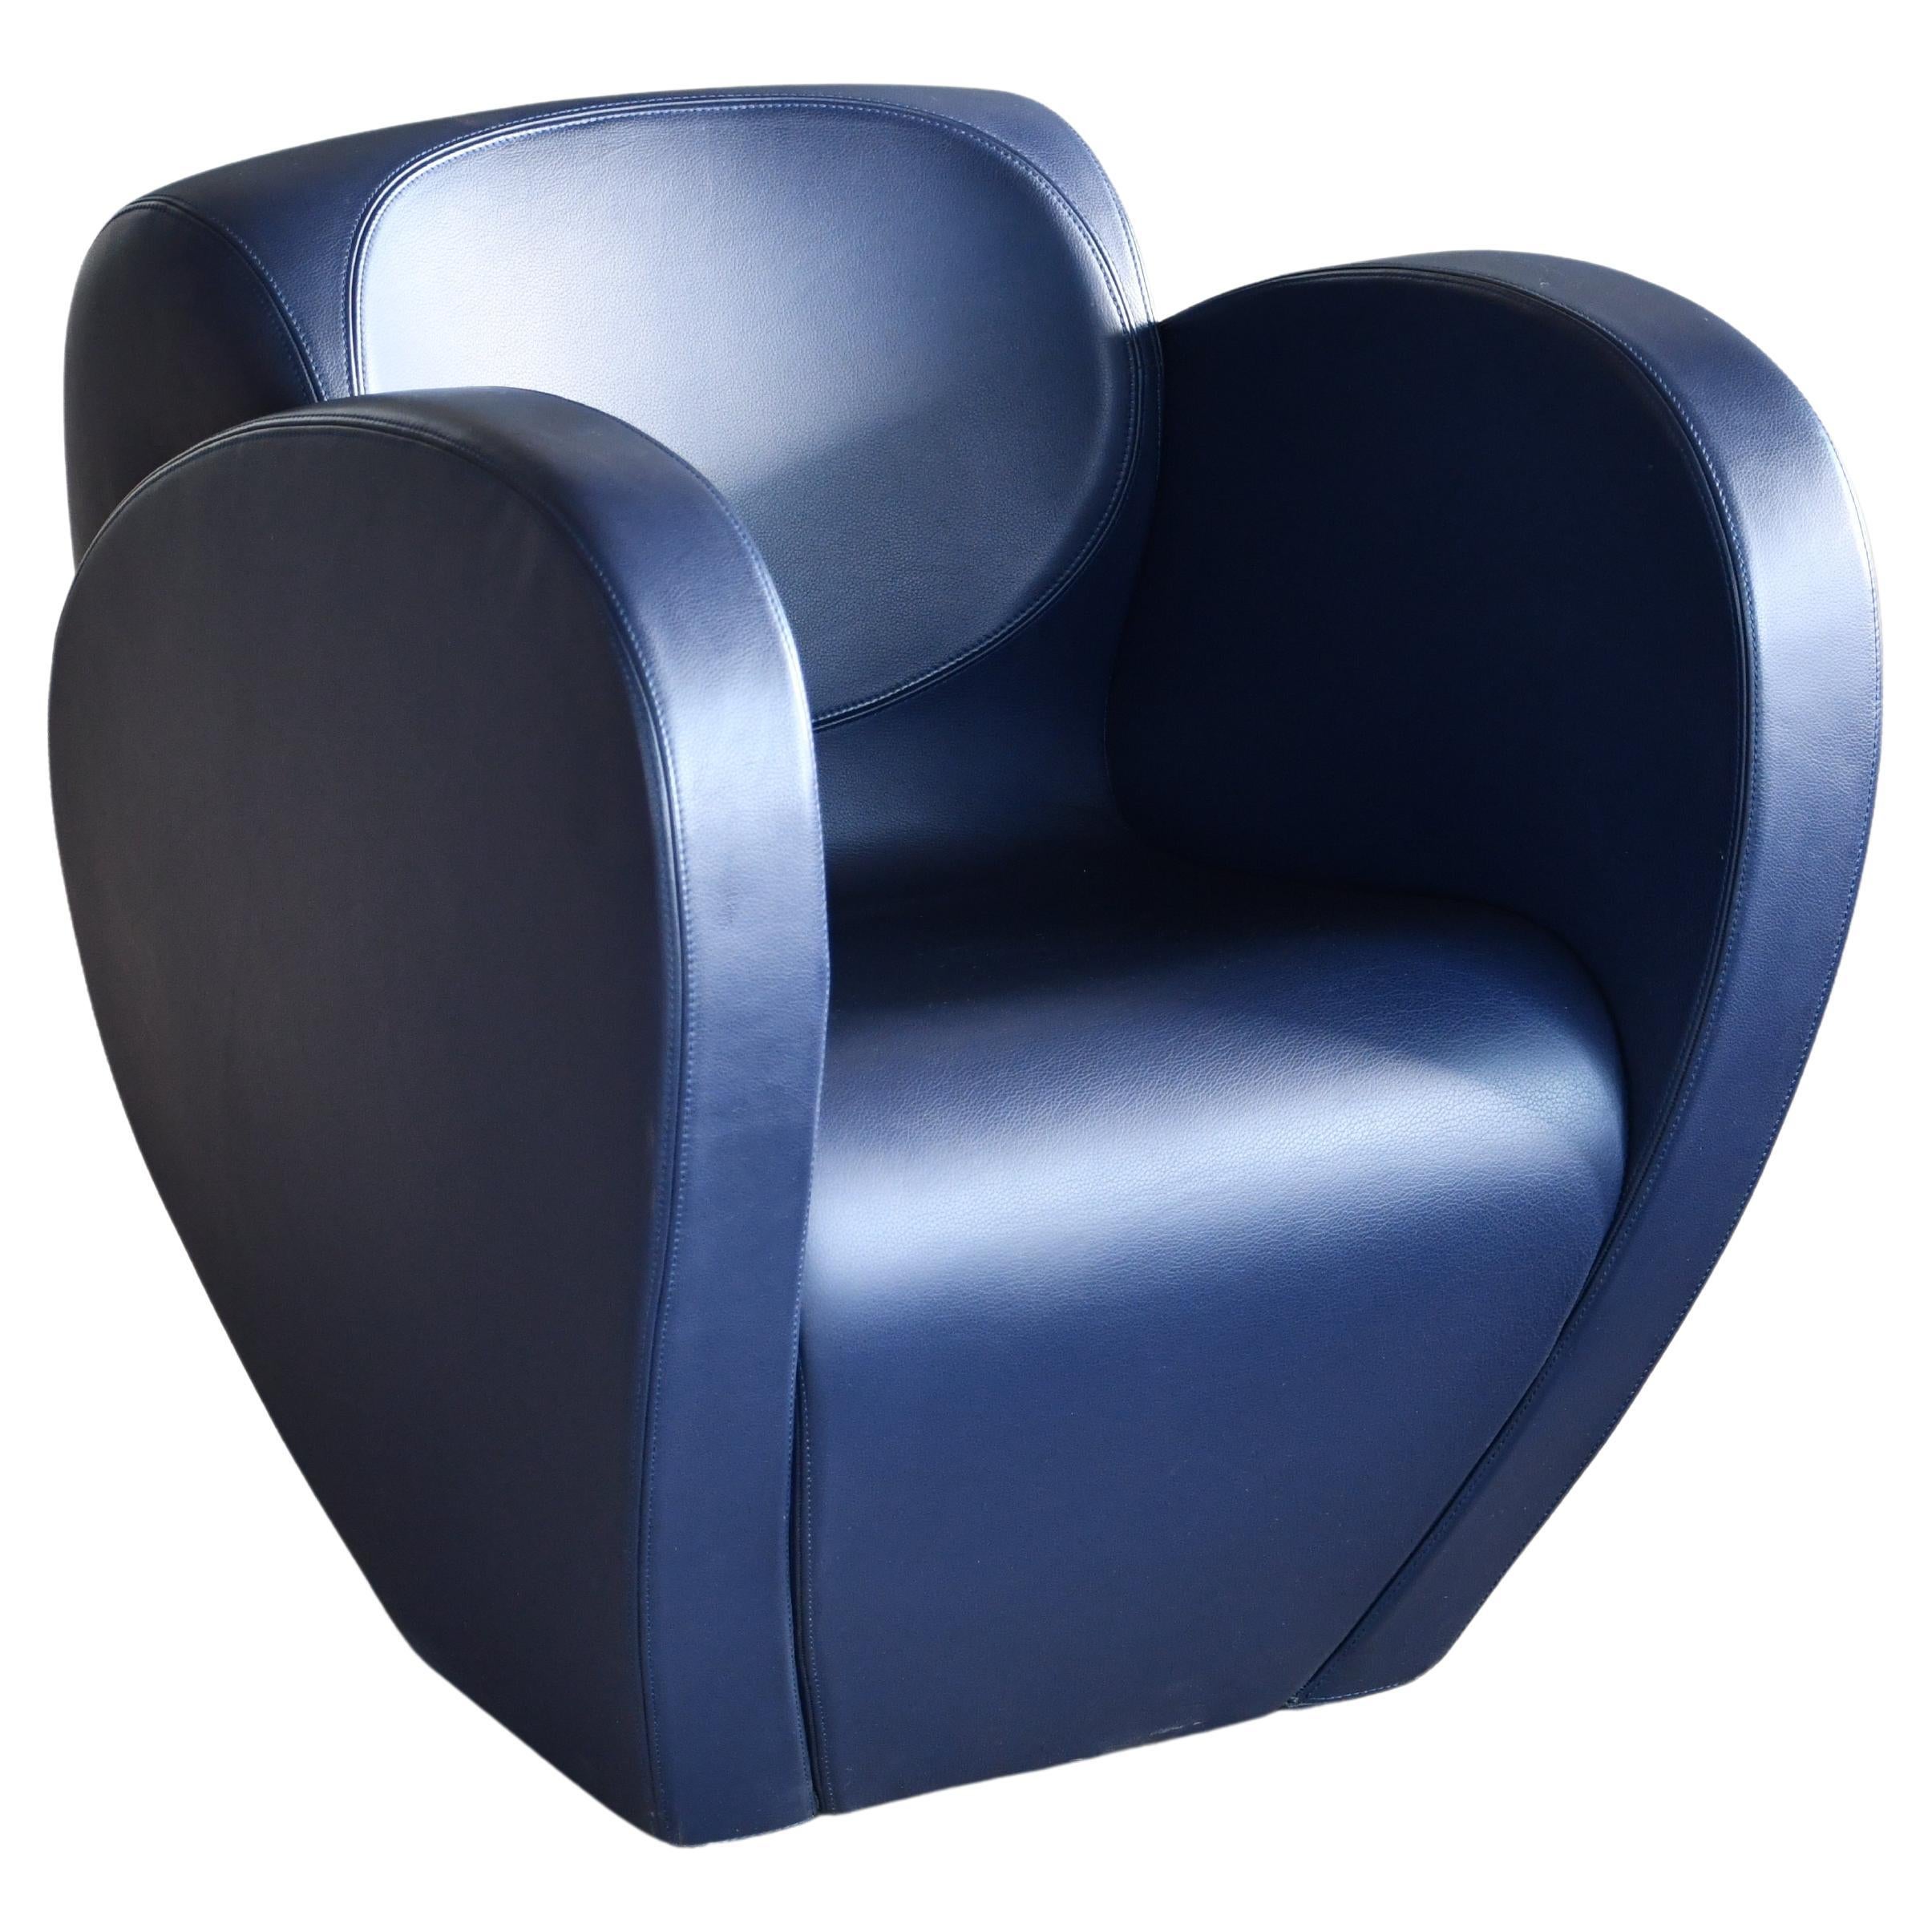 Ron Arad Lounge Chair Model in Blue Leather for Moroso, Italy 